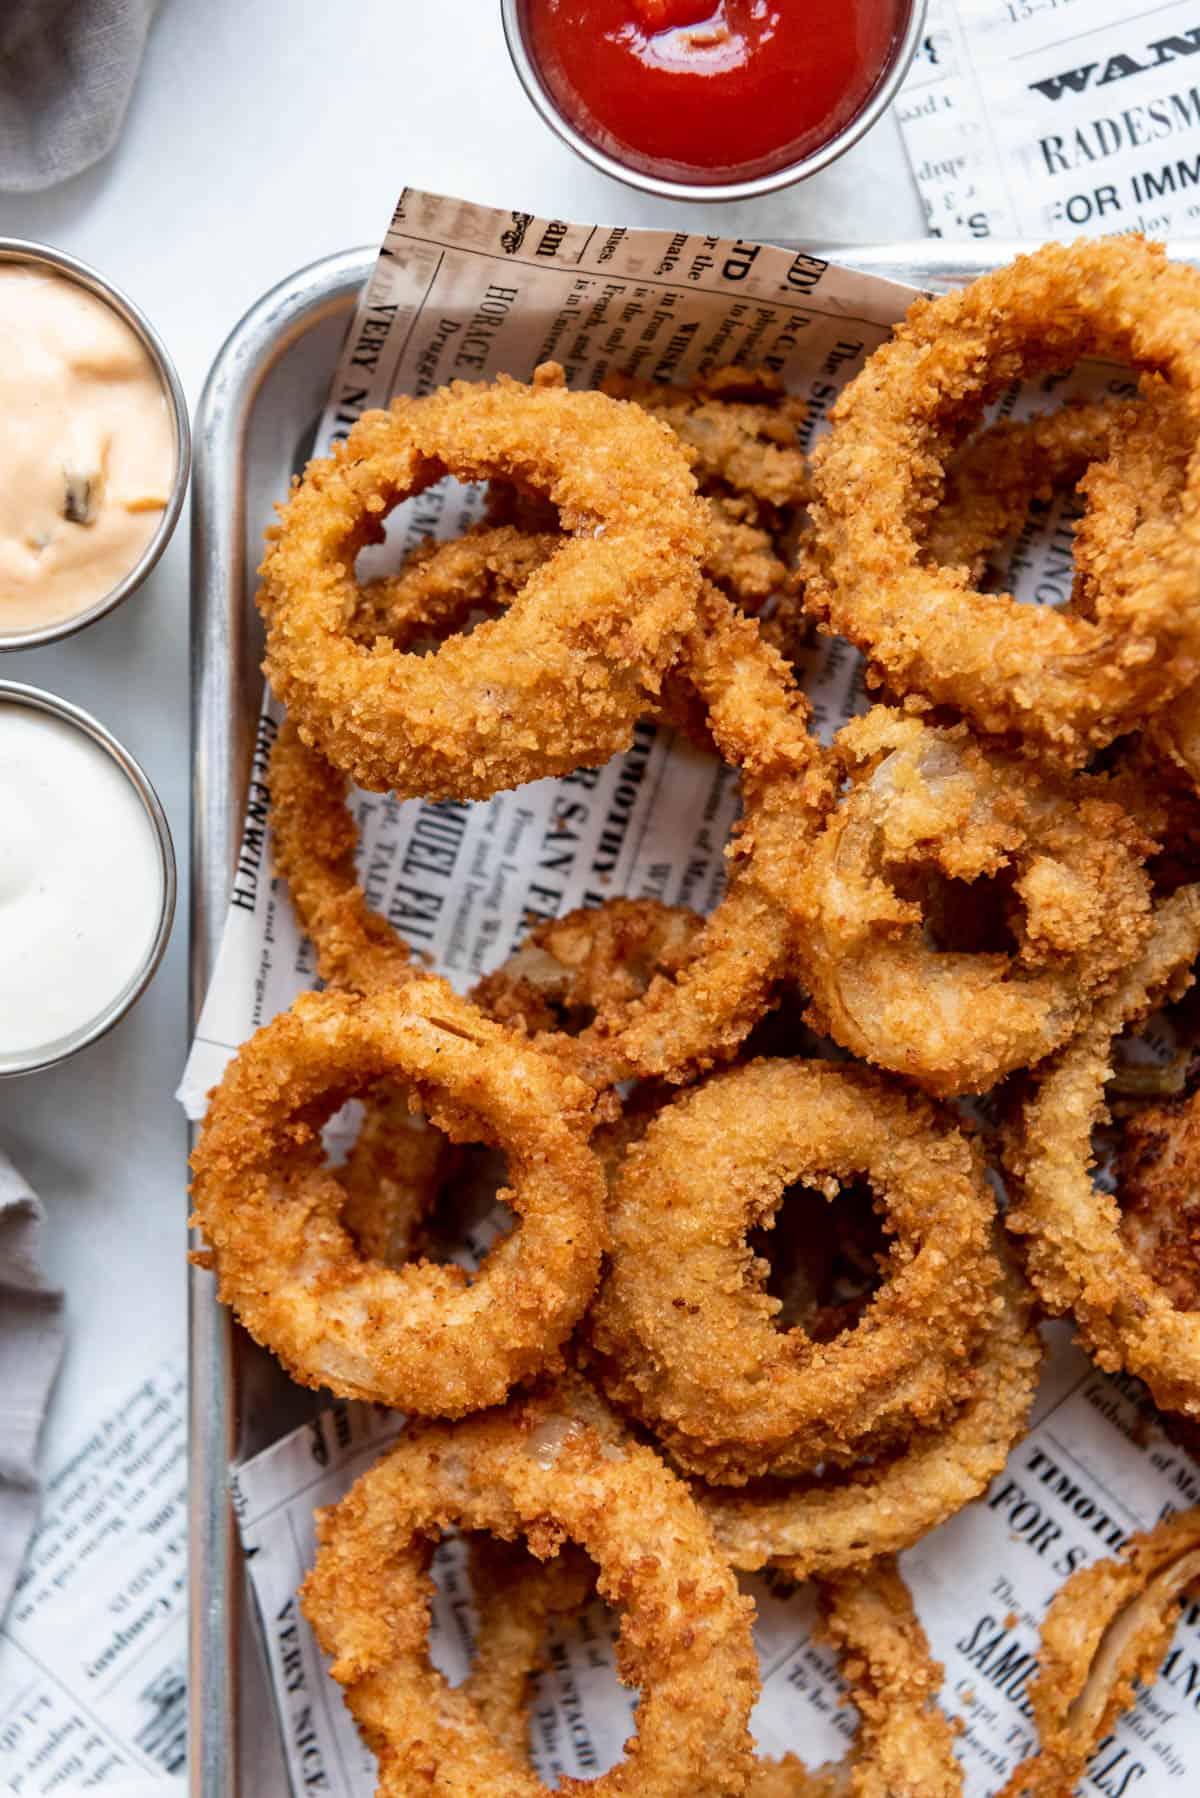 Crispy fried onion rings on newsprint next to dipping sauces.